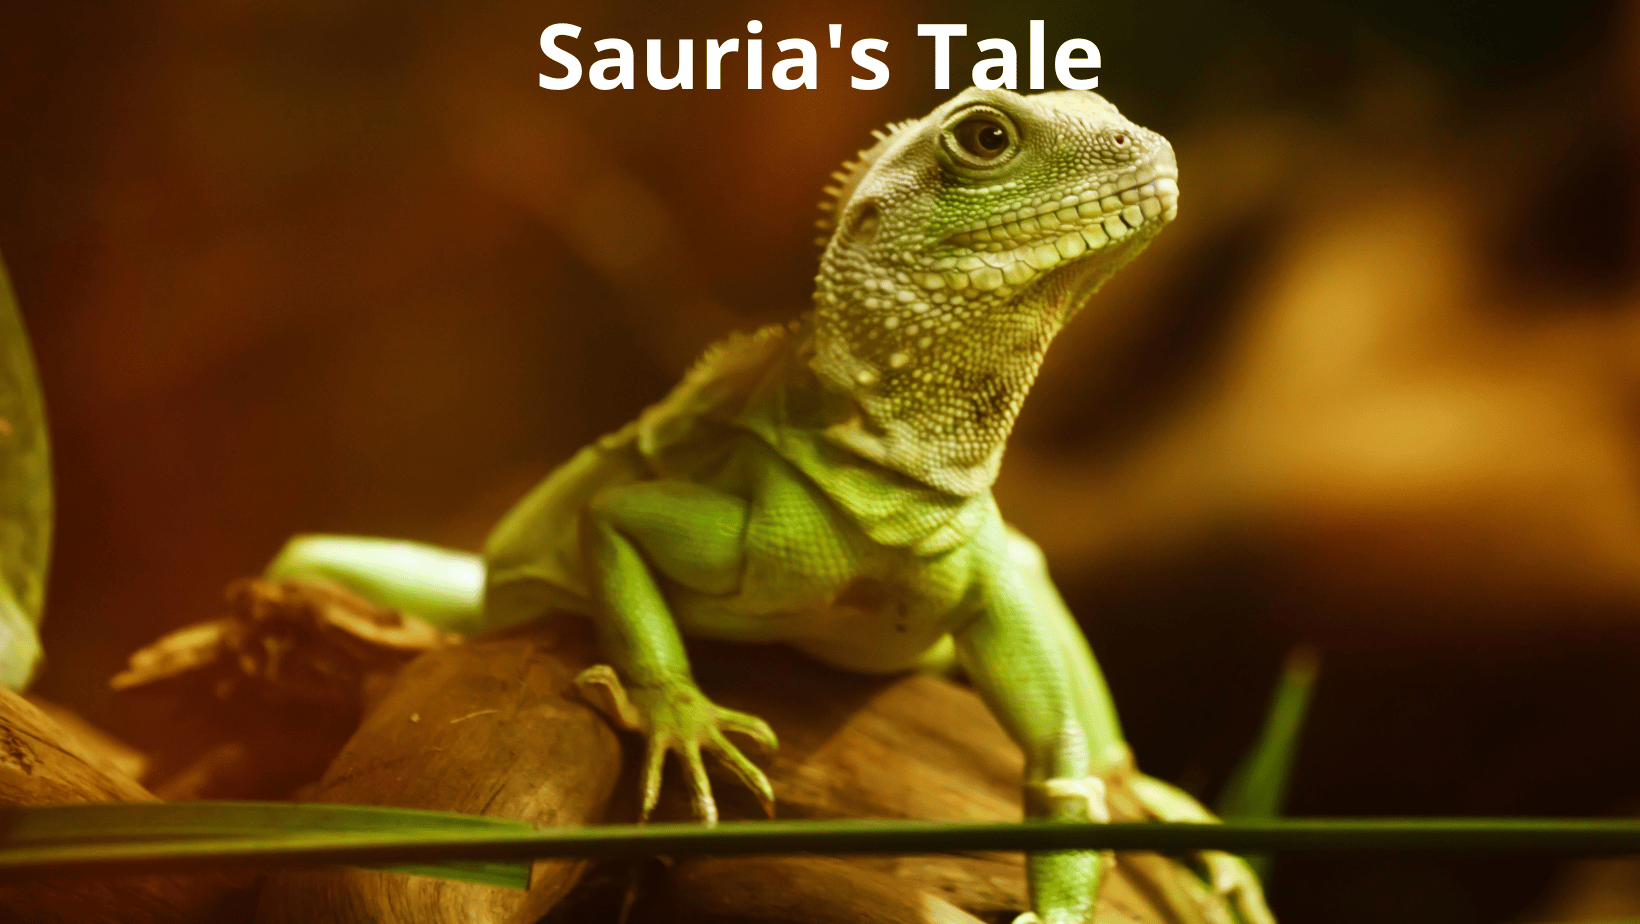 Sauria’s Evolutionary Tale: Uniting Archosaurs, Lepidosaurs, and Modern Reptiles